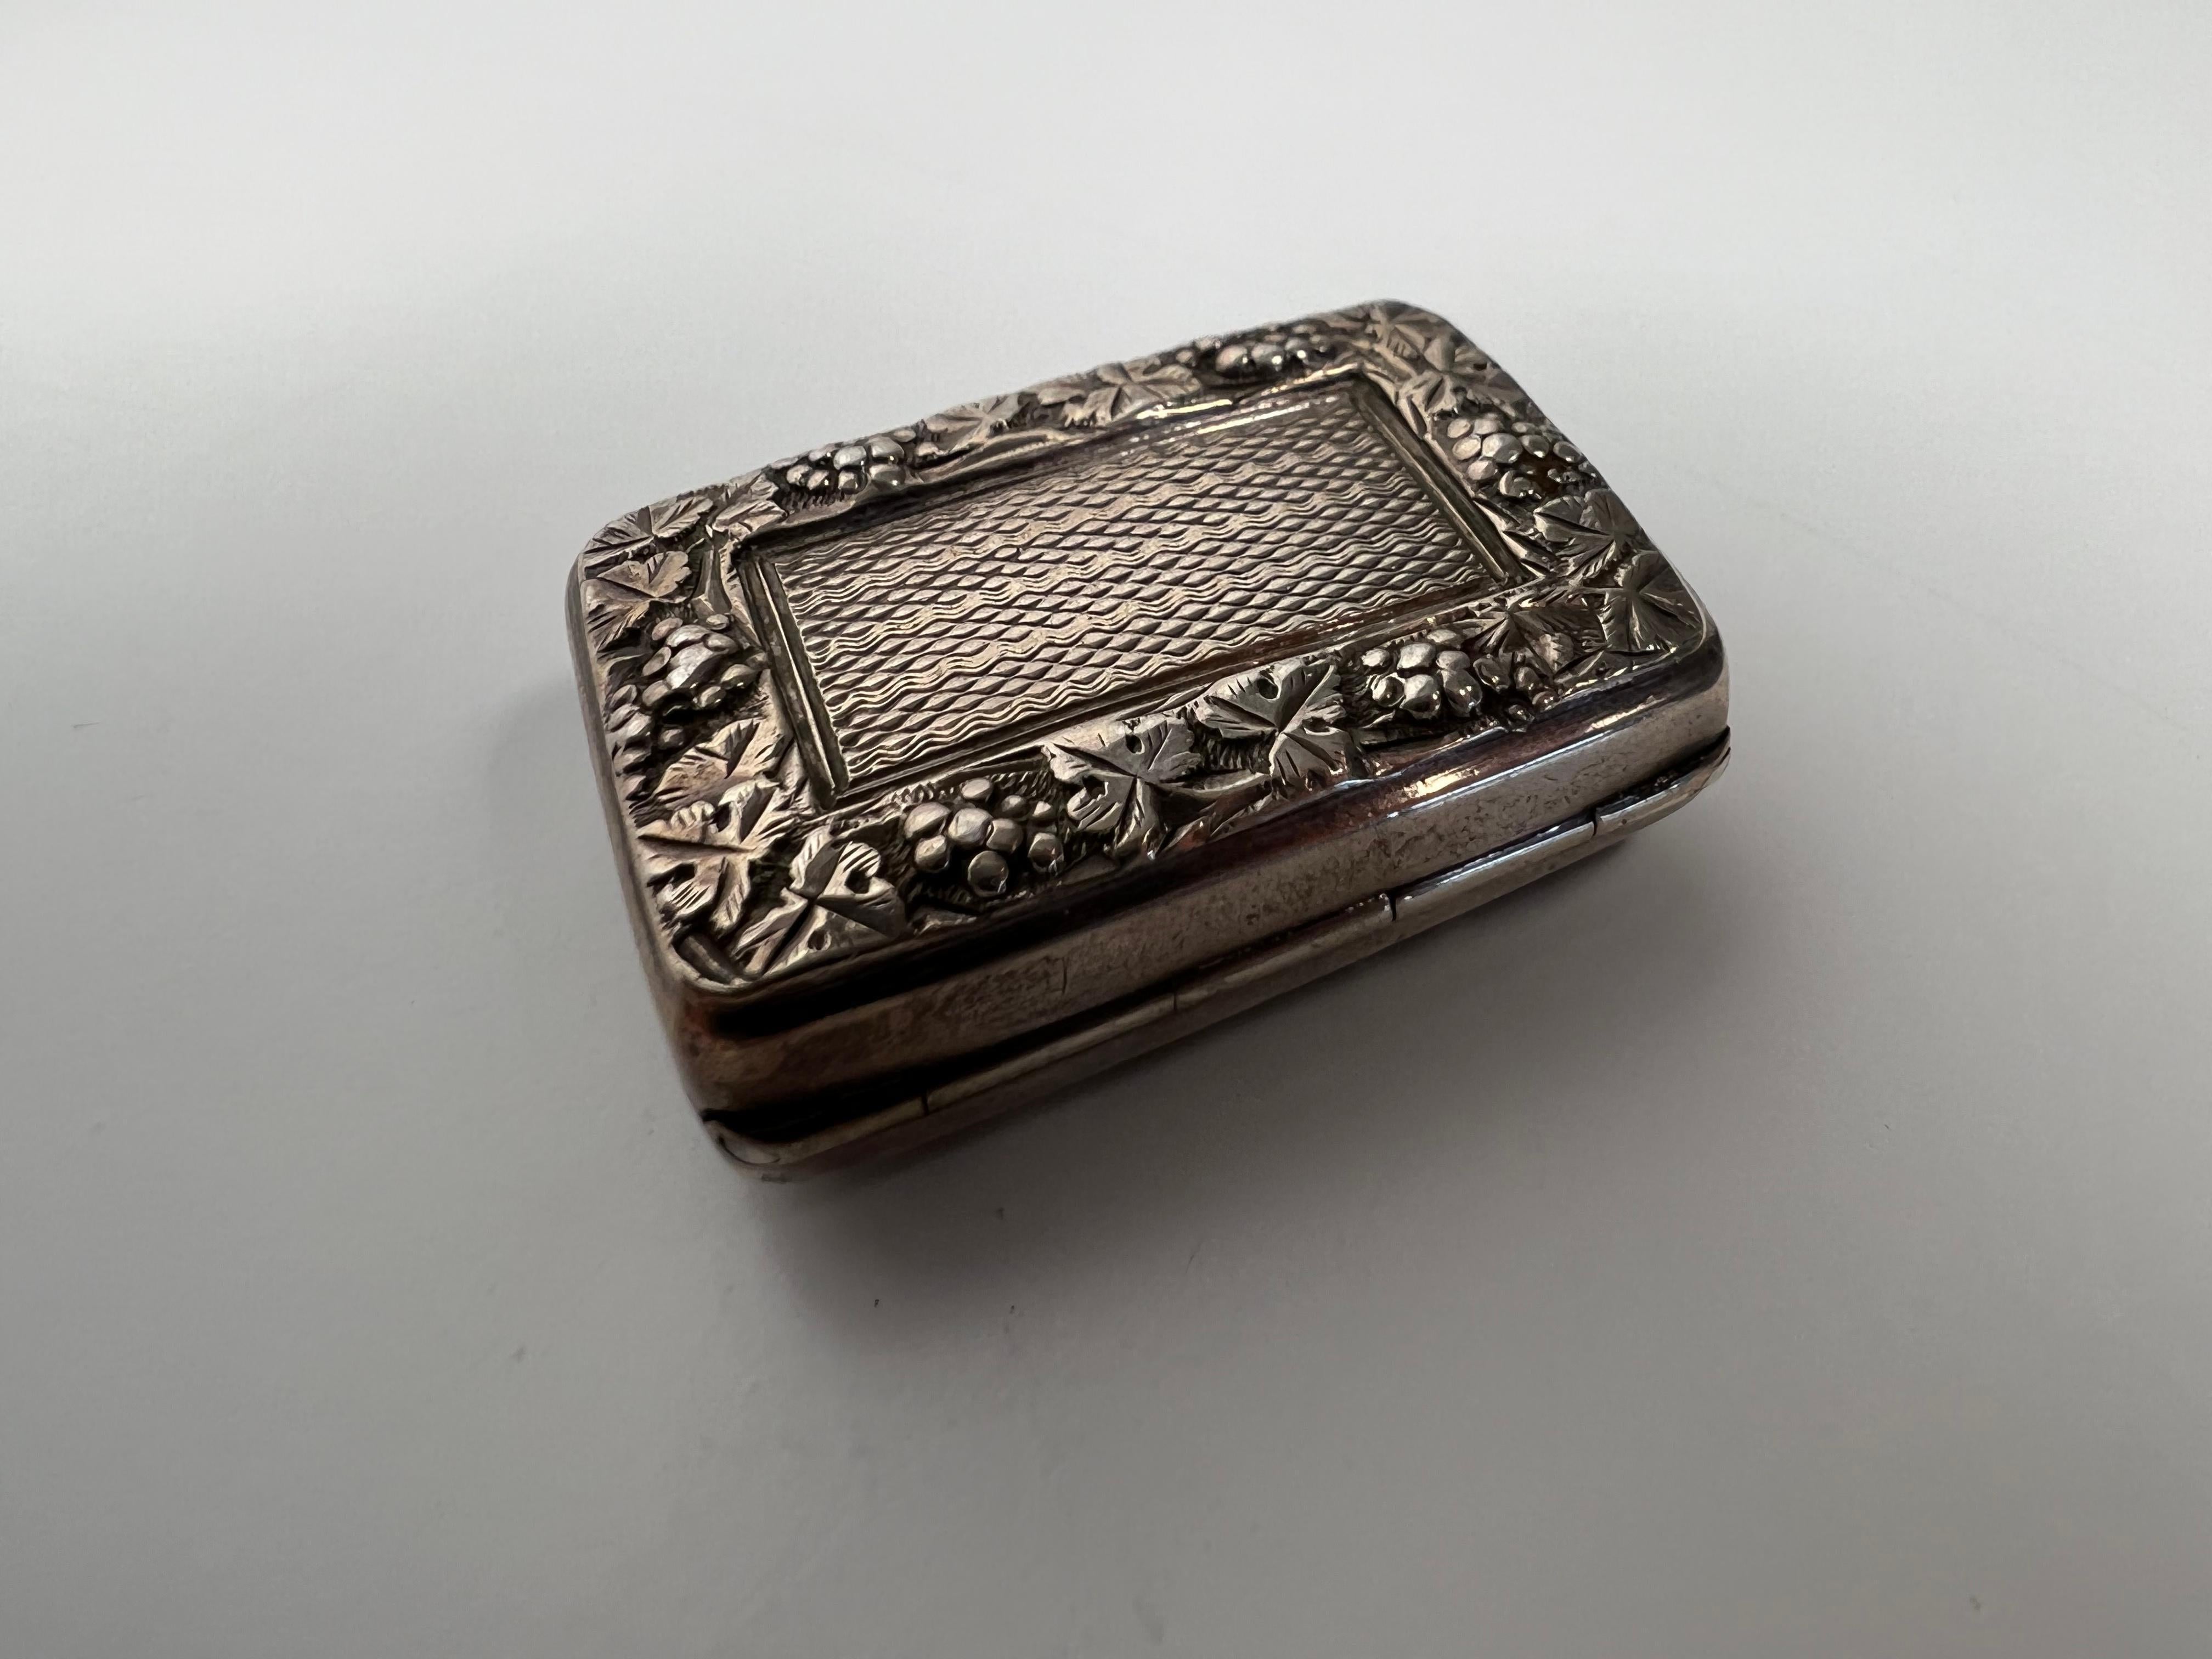 Early 19th century sterling silver vinaigrette by John Willmore-Birmingham Silver maker. Notice the extraordinarily hand pieced and engraved fold out grille and interior, its beautiful. John Willmore registered his mark as a snuff box maker in 1806